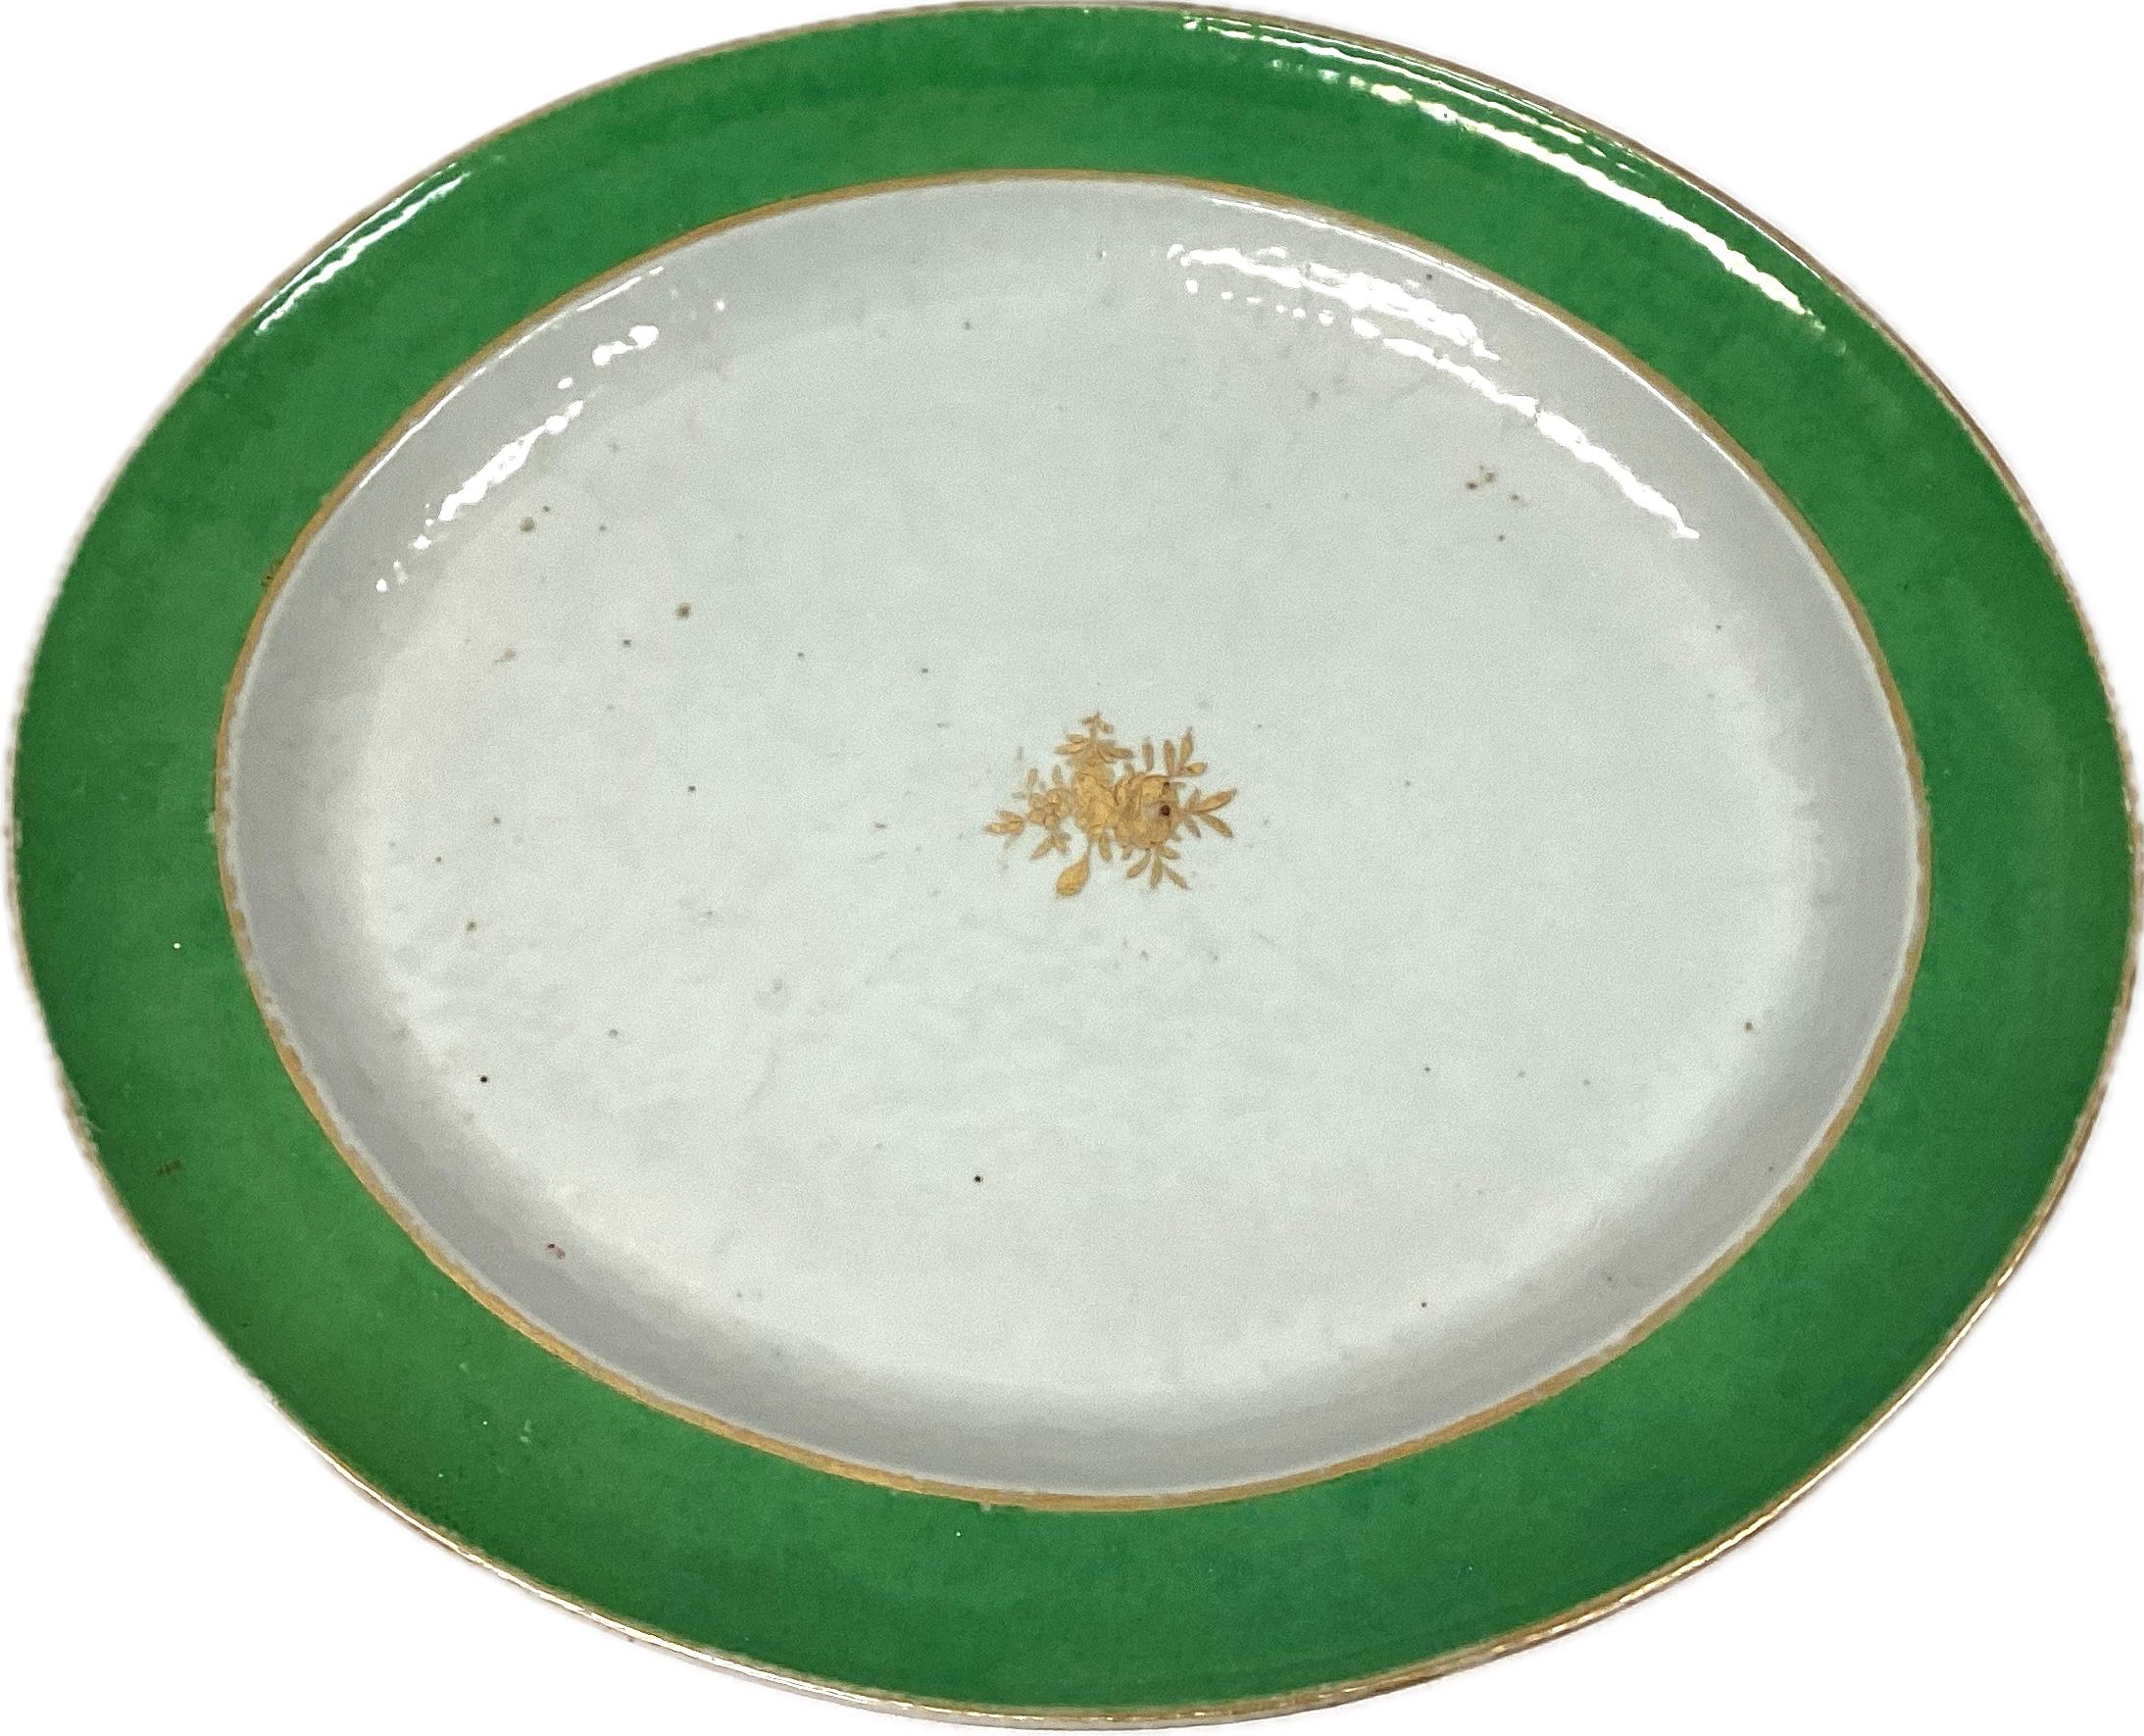 18th Century Chinese Export Platter With Gold Accent Floral Center For Sale 2